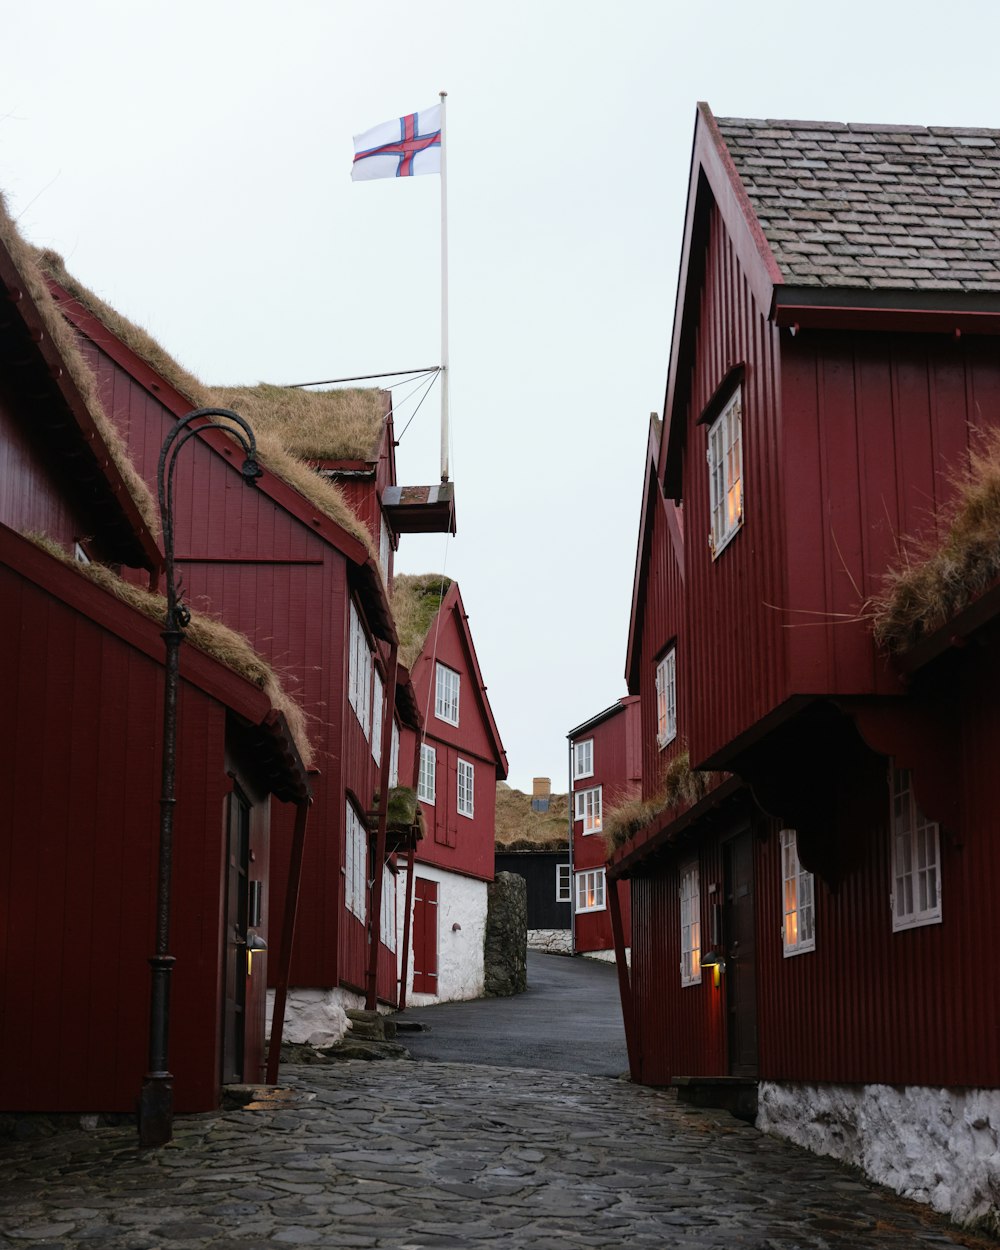 a cobblestone street with red buildings and a flag on a pole